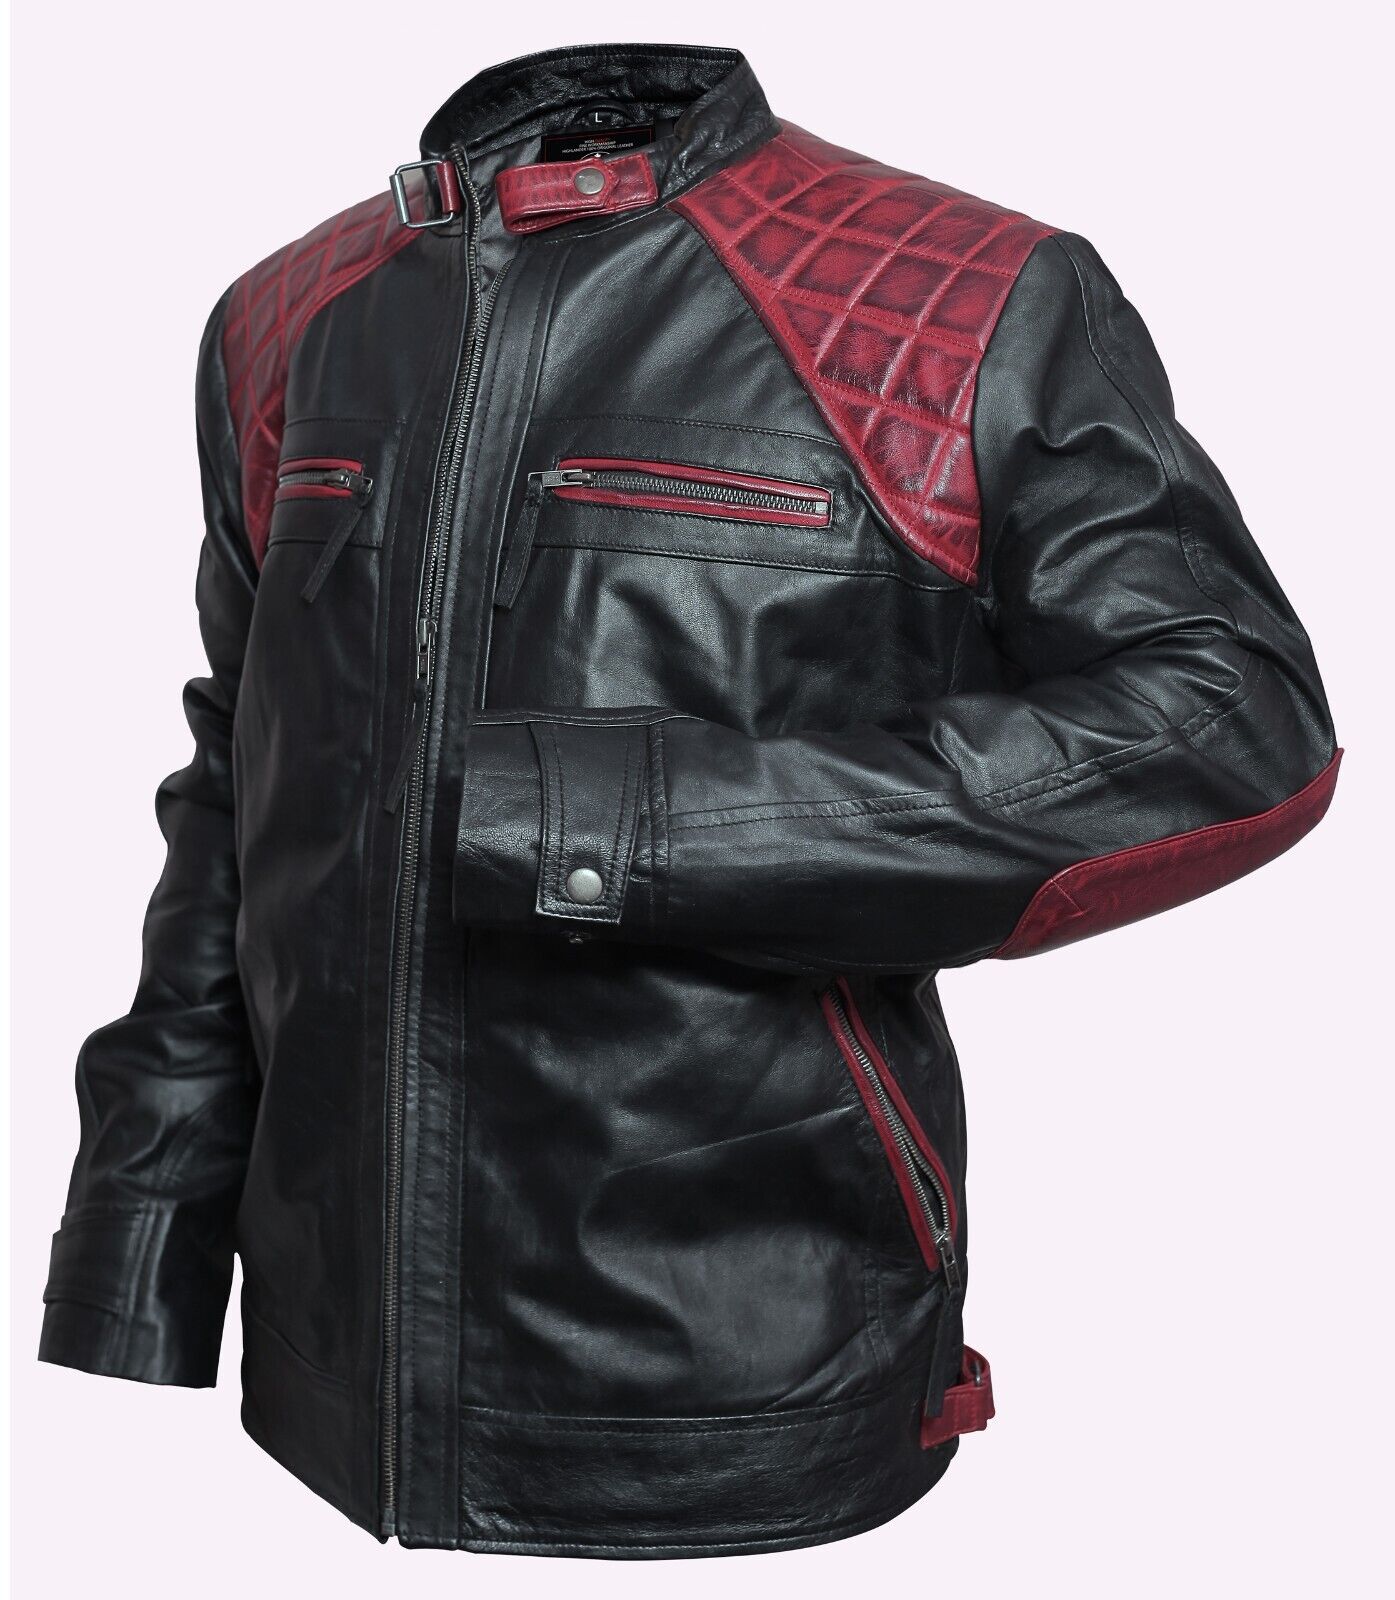 Rollins Black and Maroon Leather Jacket